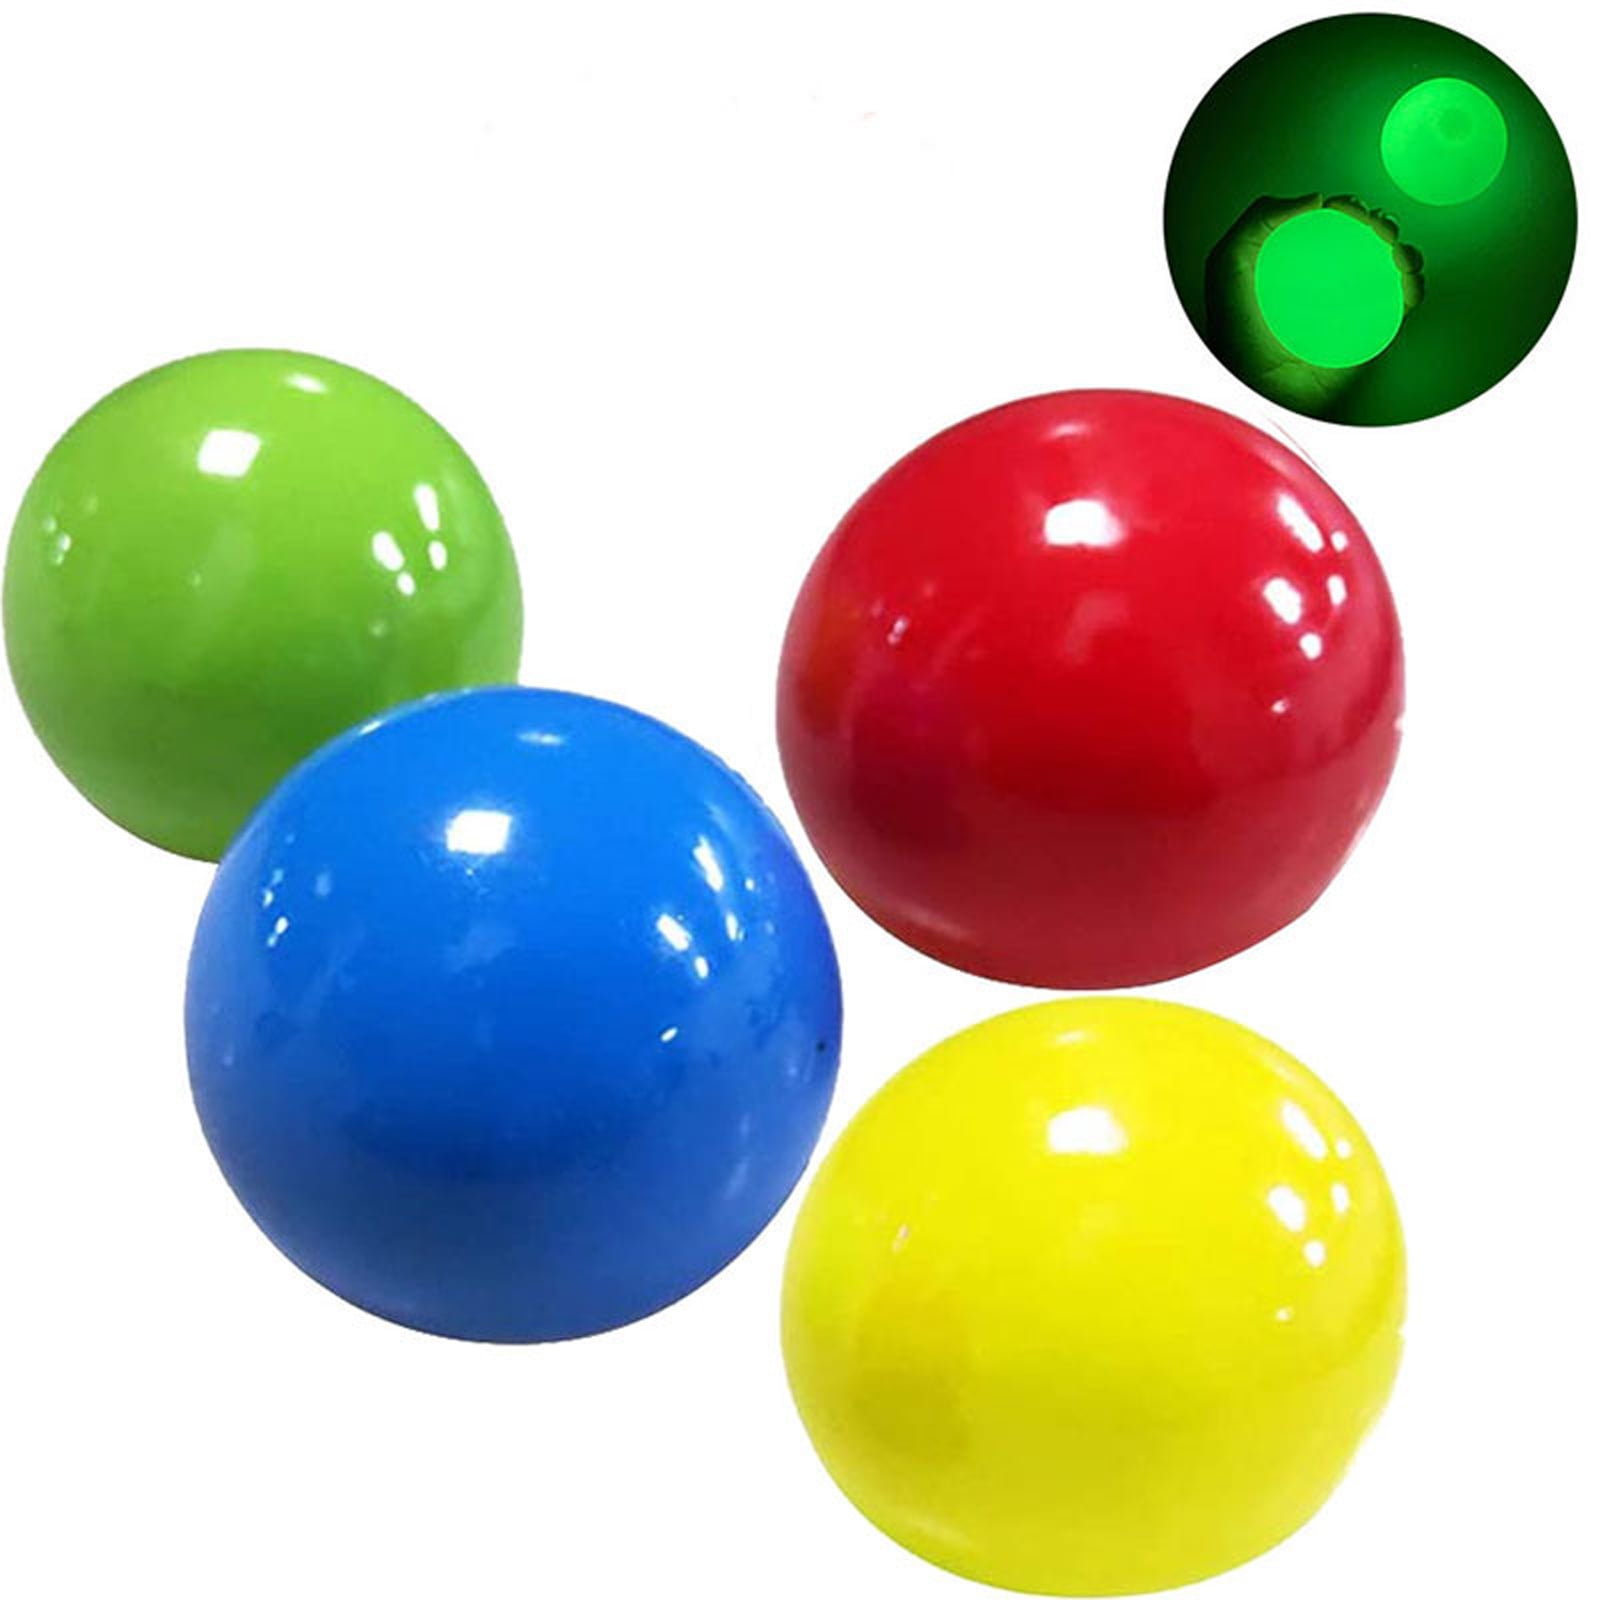 1/4PCS Sticky Wall Balls for Ceiling Stress Relief Globbles Squishy Toy HOT! 